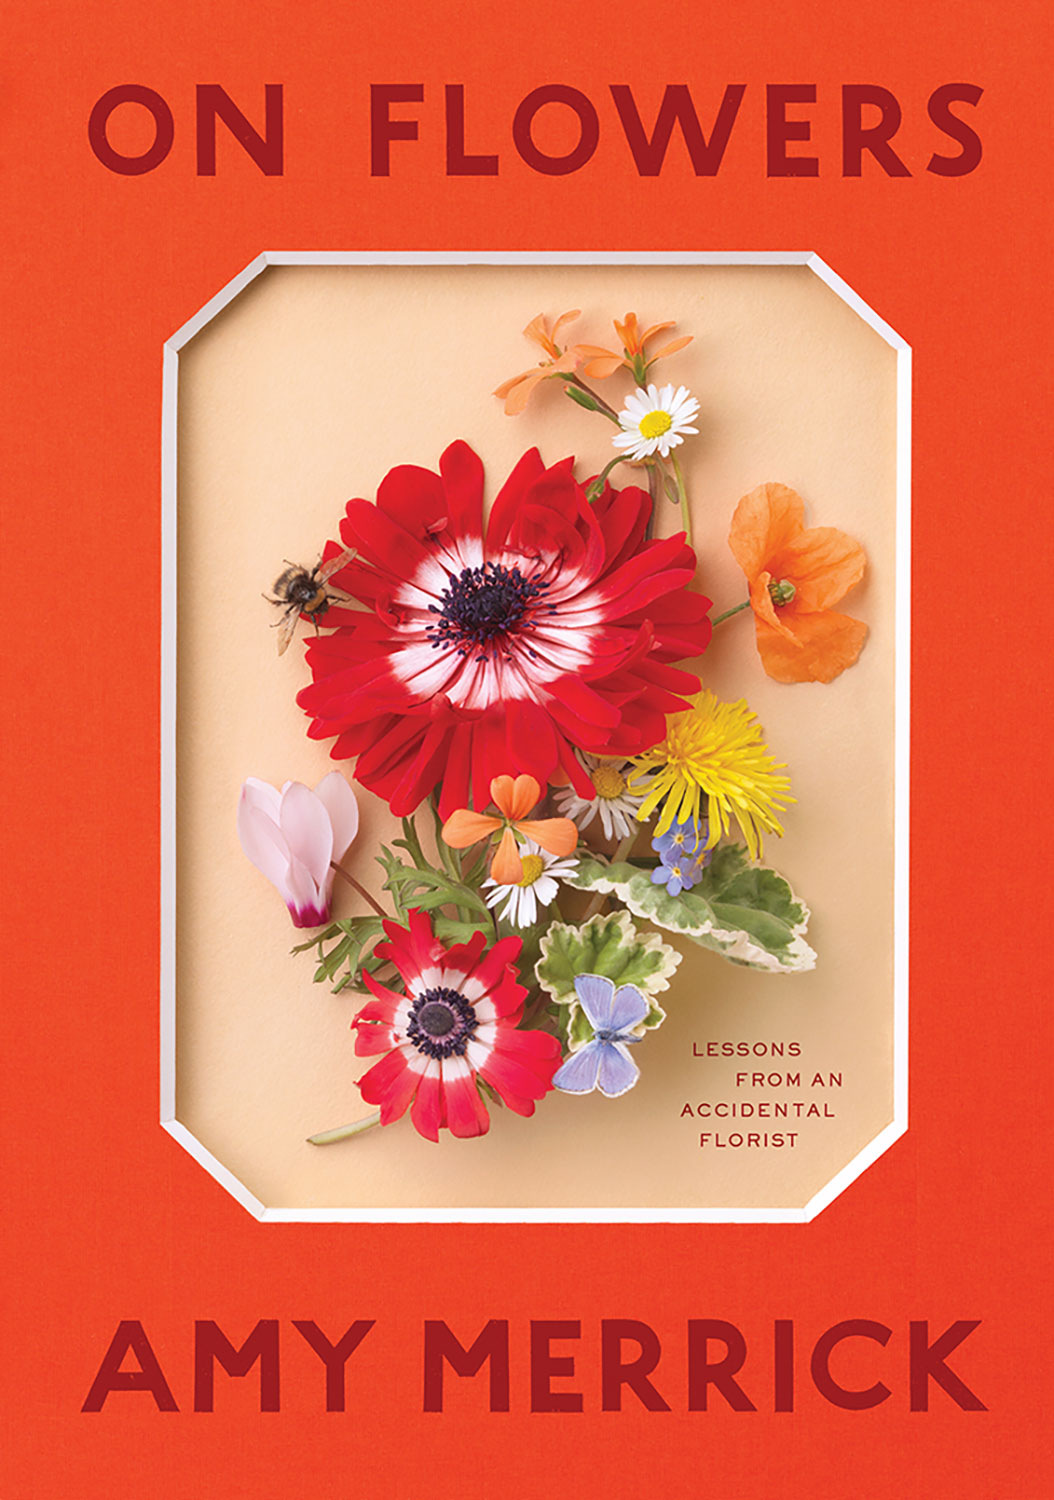 book cover for On Flowers: Lessons from an Accidental Florist (Artisan, 2019) by florist Amy Merrick